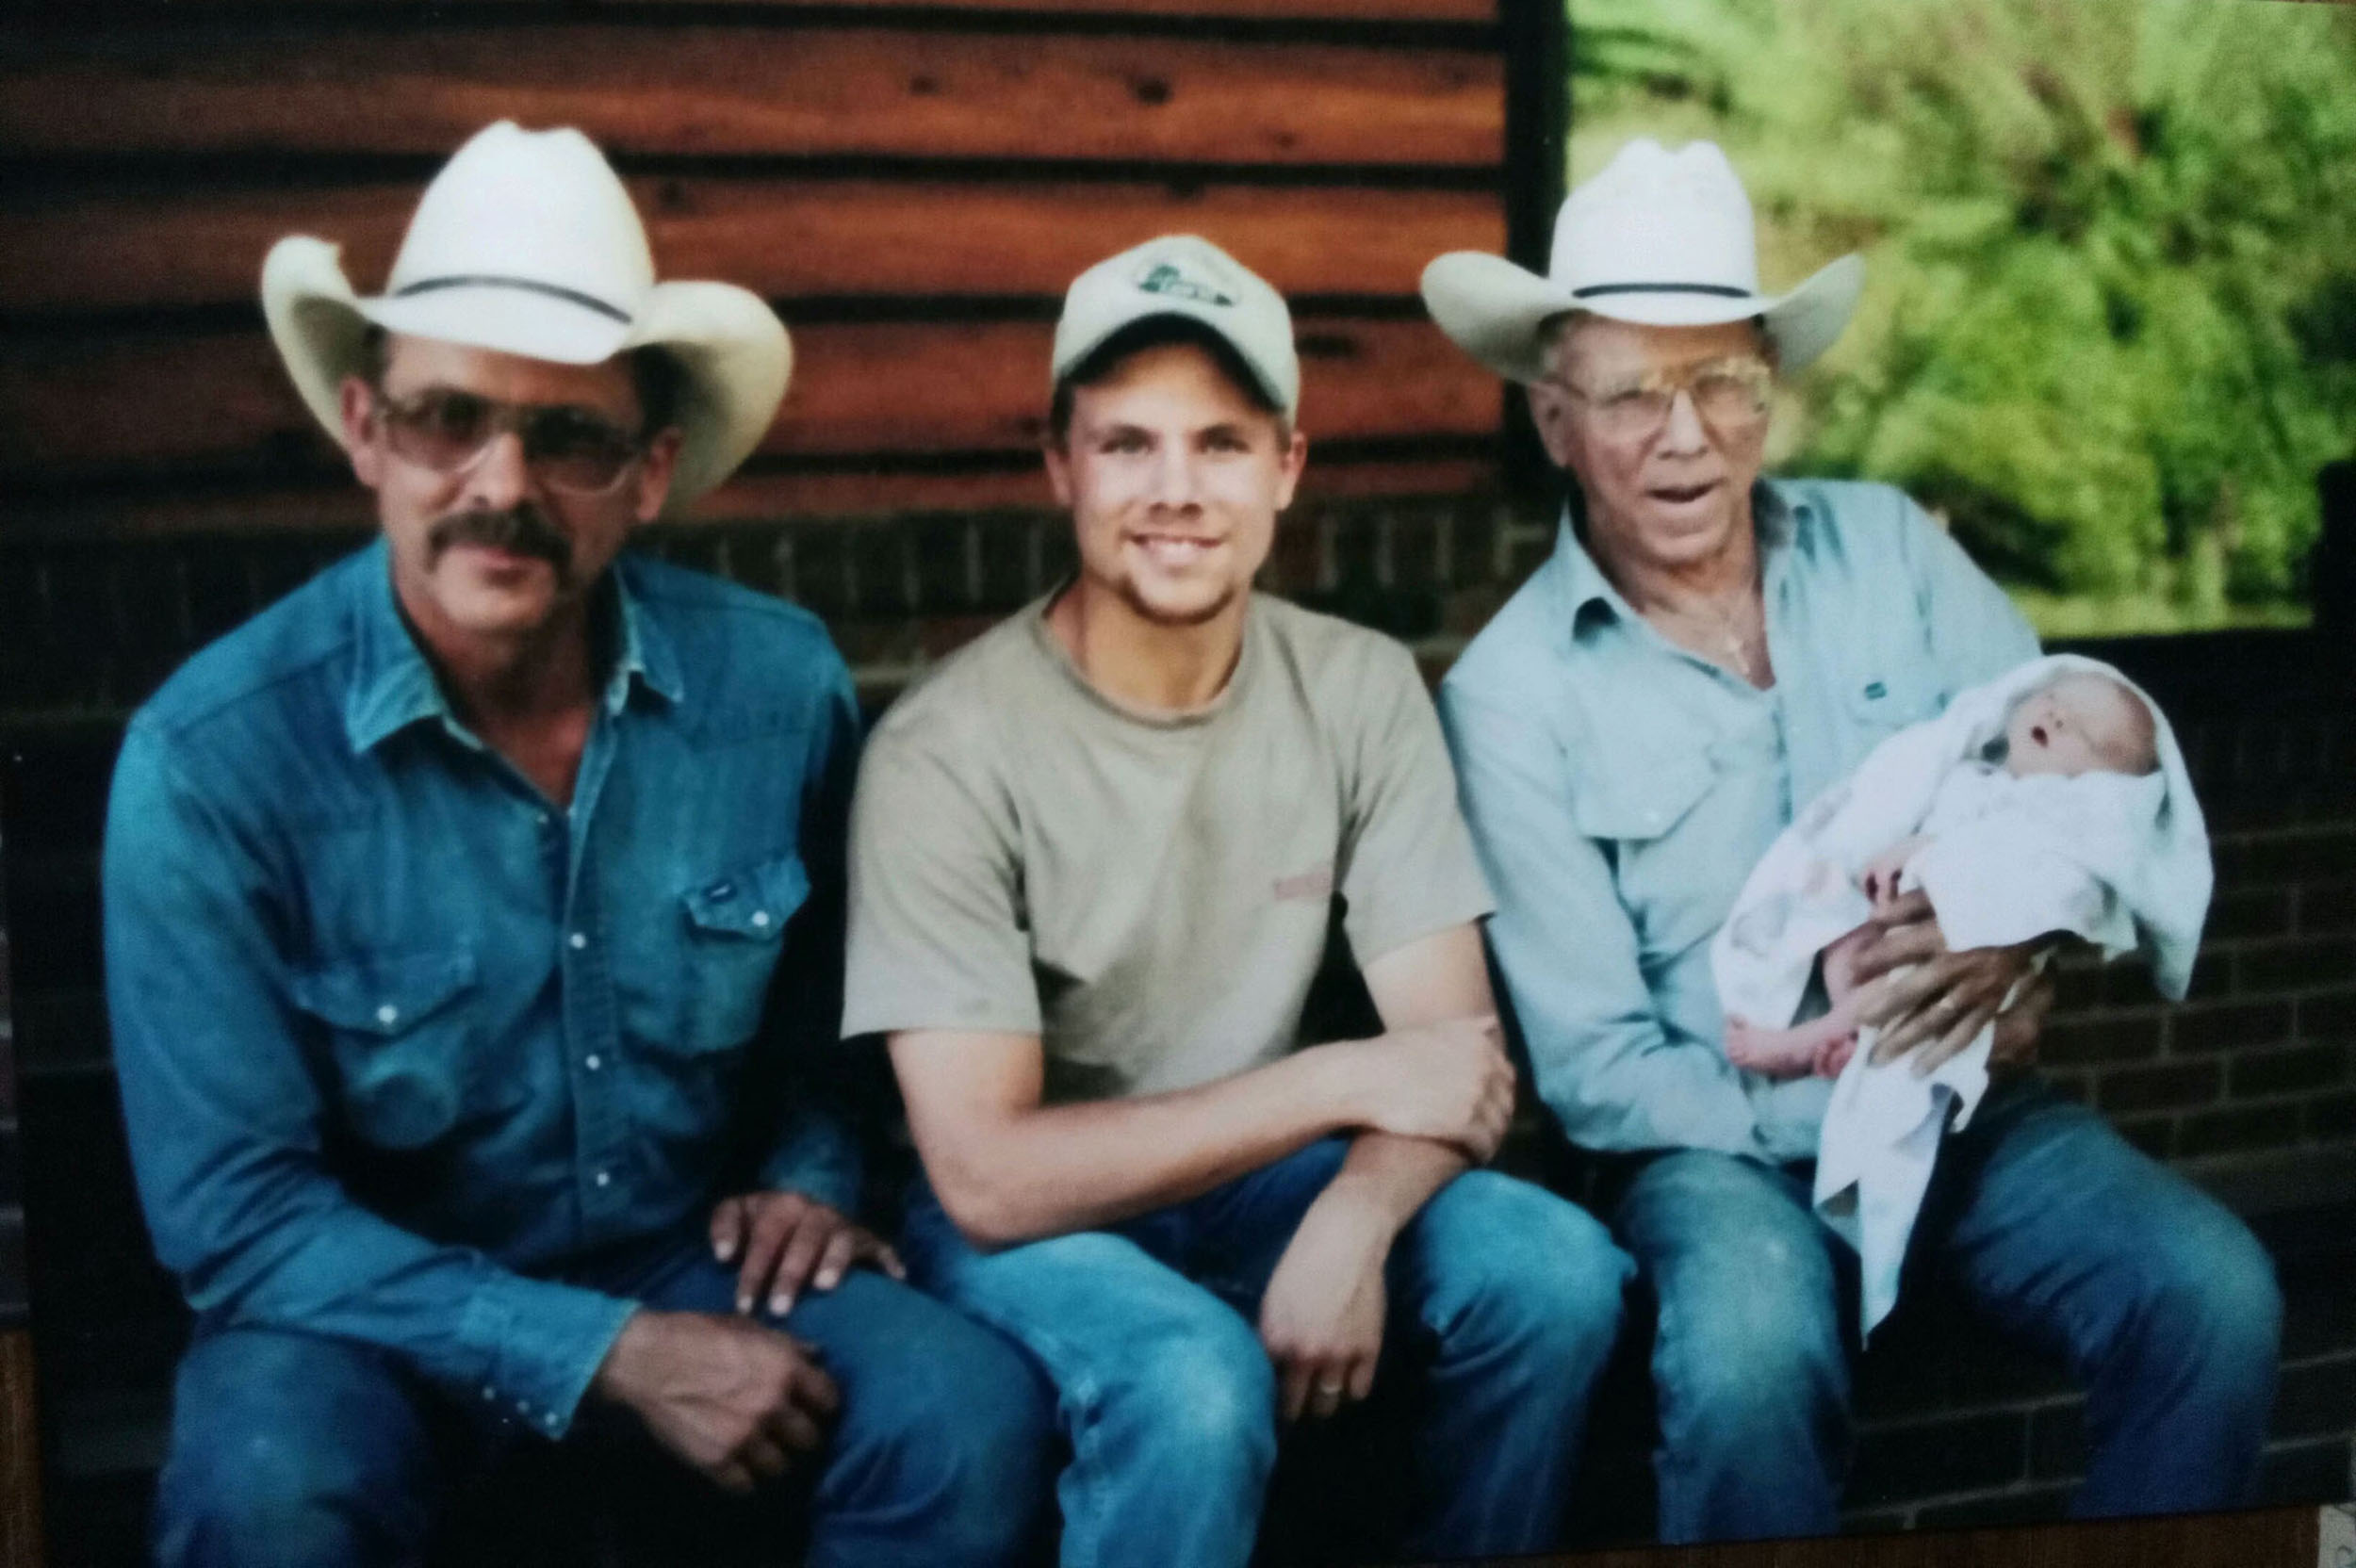 From left to right: Greg Hampson, Ben Hampson and Bill Hampson holding Ben’s son, Thad